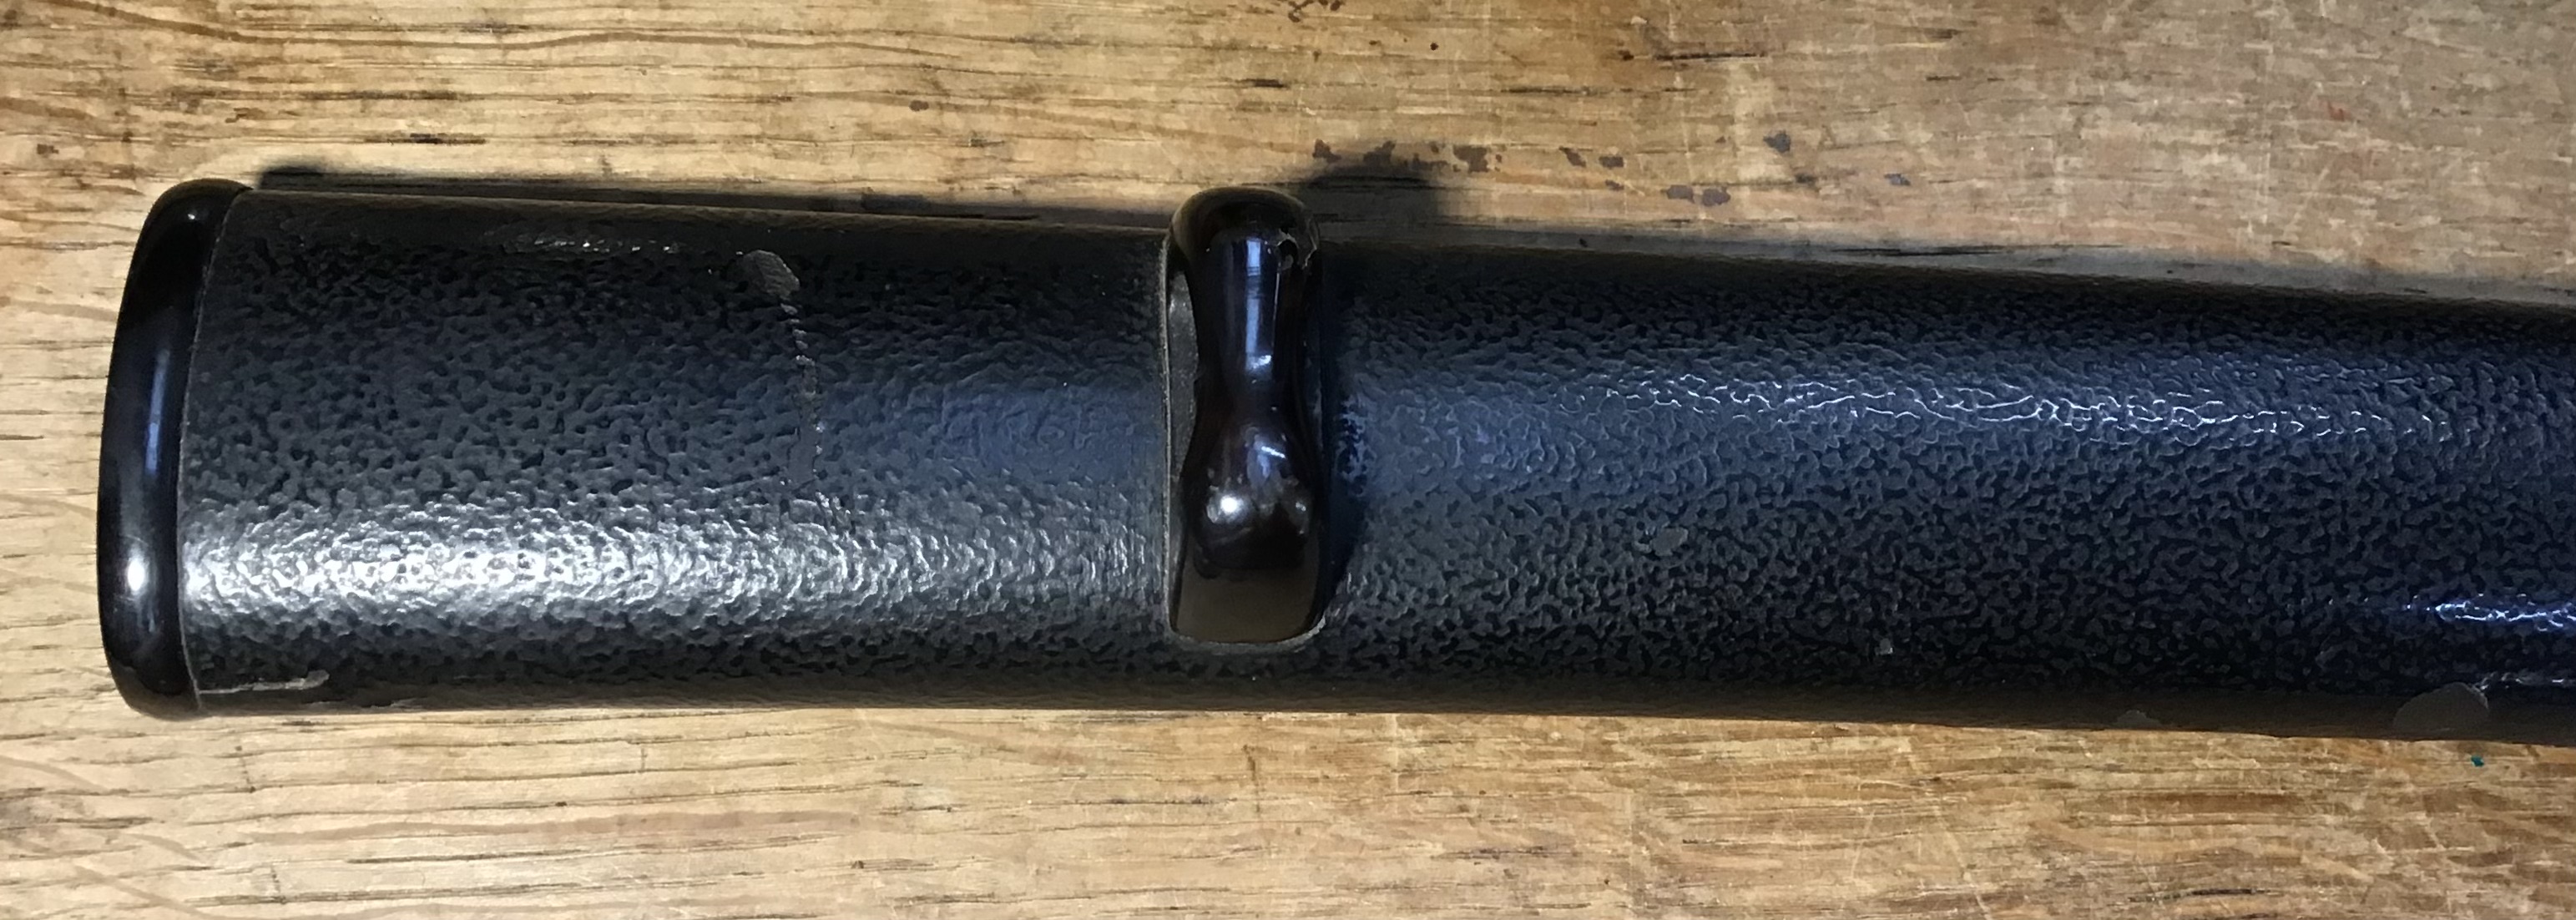 19th Century Japanese Katana Sword (blade could be older), Signature to tang, black lacquered - Image 18 of 21